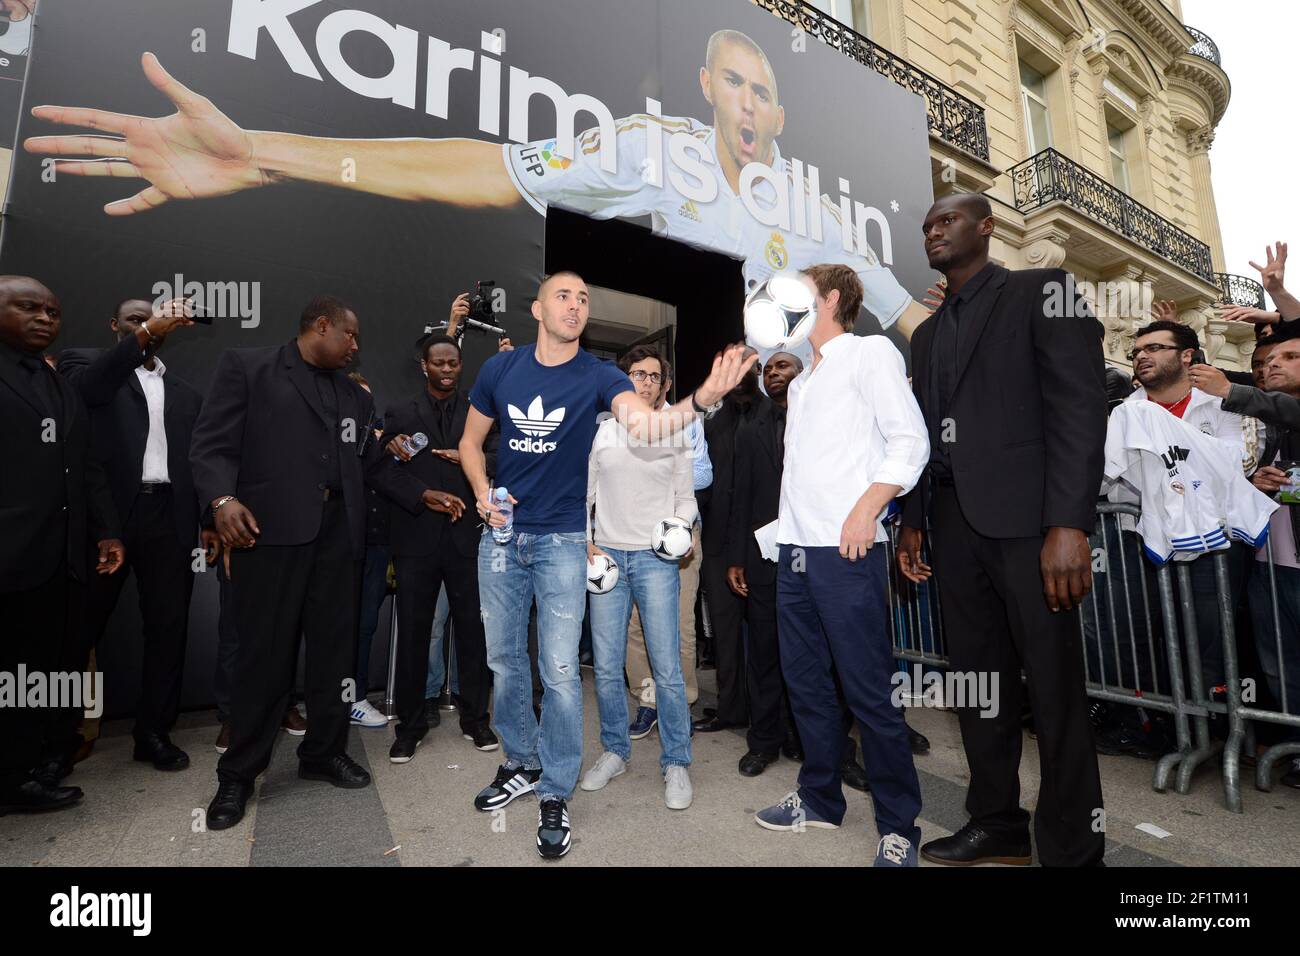 FOOTBALL - KARIM BENZEMA PRESS CONFERENCE AND ADIDAS CONTRACT SIGNATURE - ADIDAS  STORE CHAMPS ELYSEE - PARIS - 22/05/2012 - PHOTO PHILIPPE MILLEREAU / KMSP  / DPPI Stock Photo - Alamy